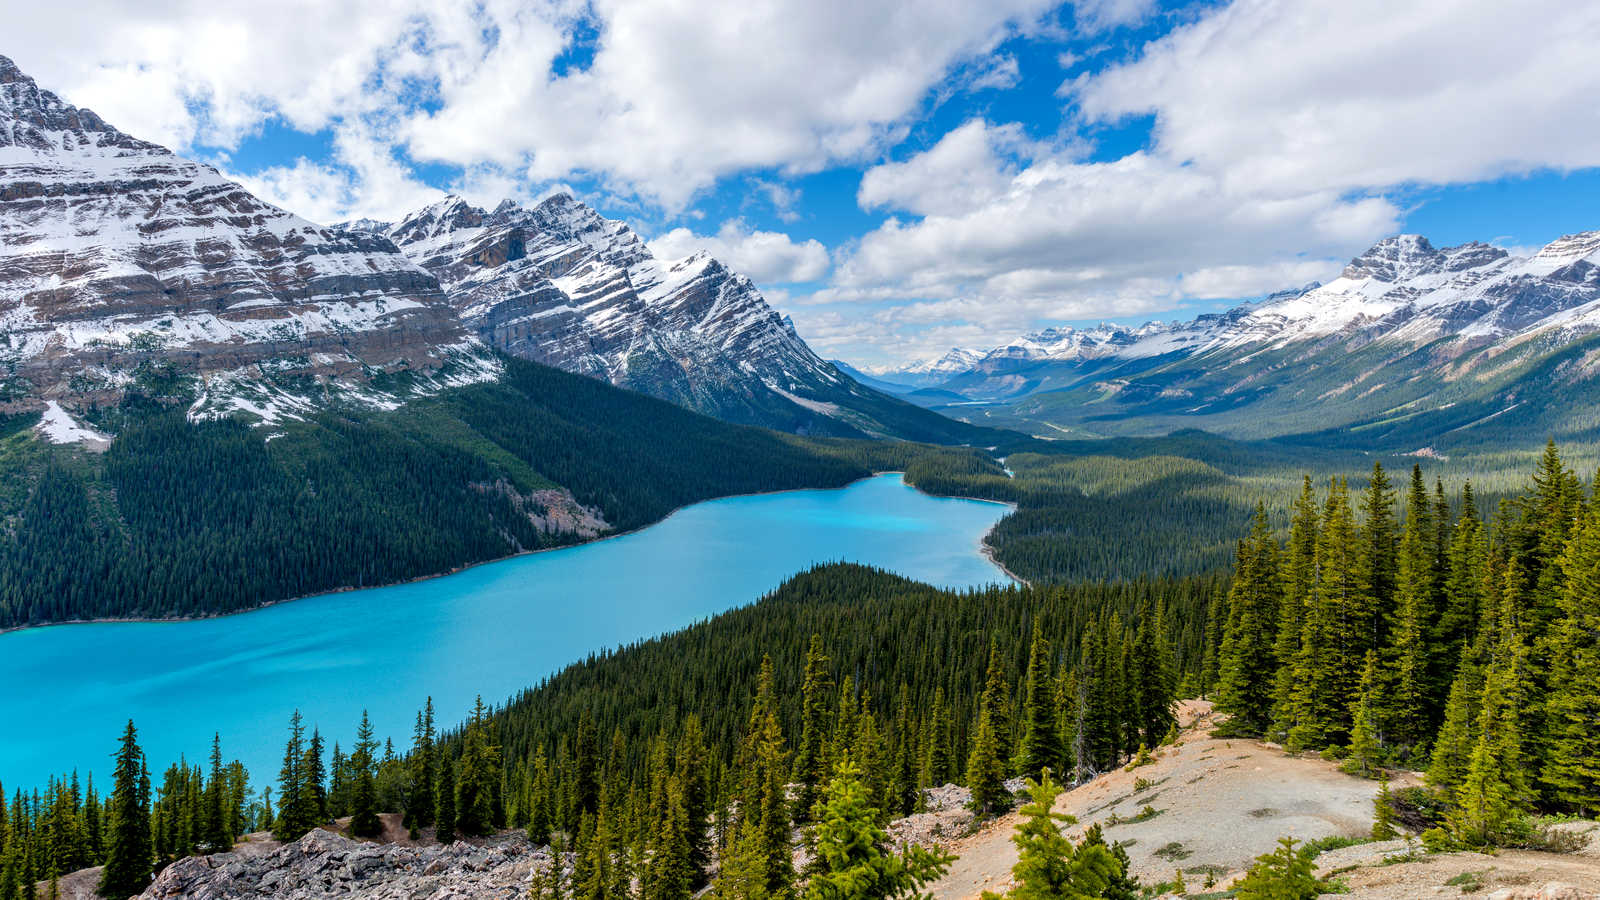 Canada’s Rocky Mountains Small Group Tour | The Great Canadian Travel Co.